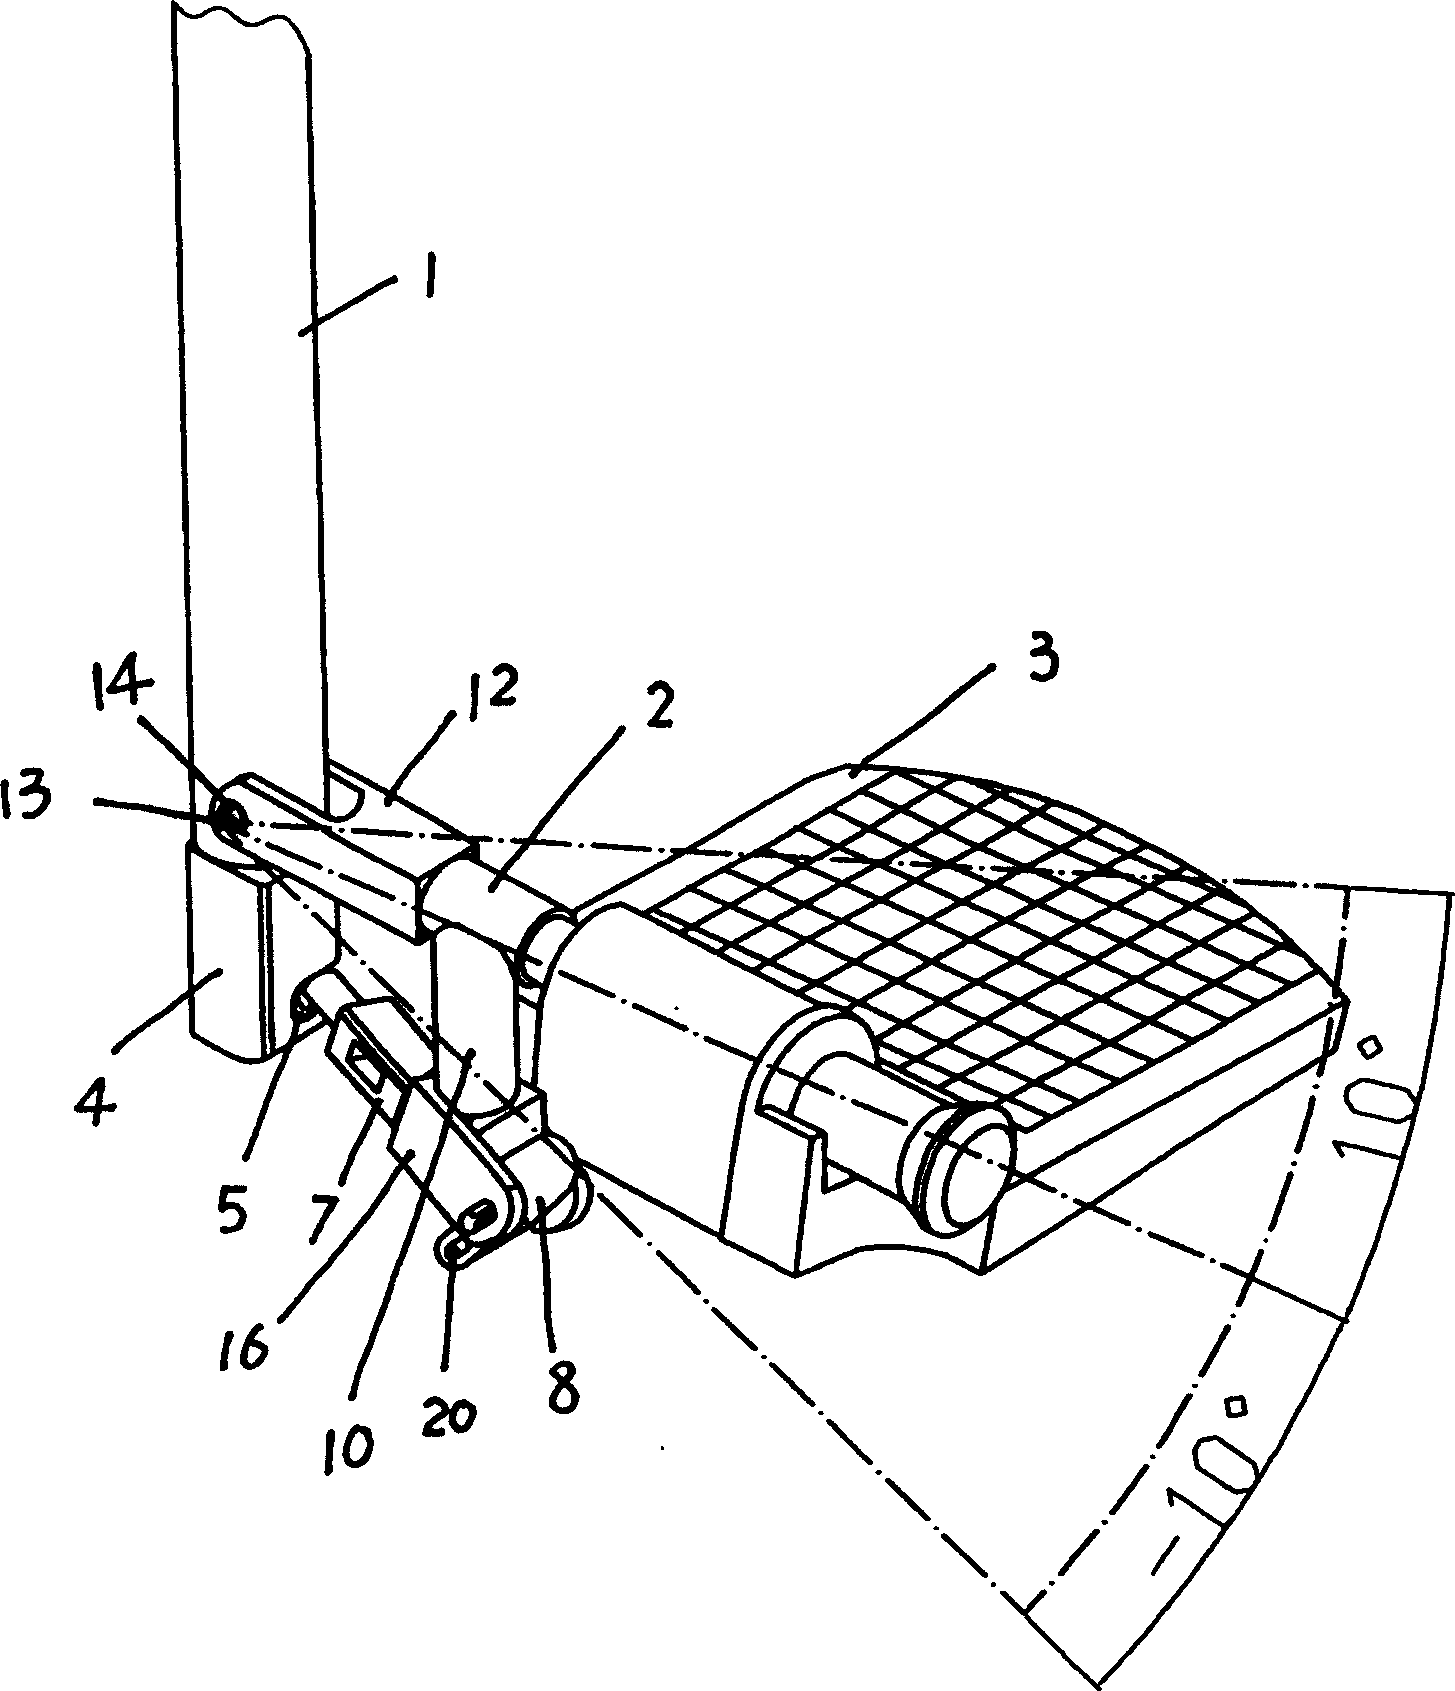 Turn-over adjuster for foot rest of wheel chair